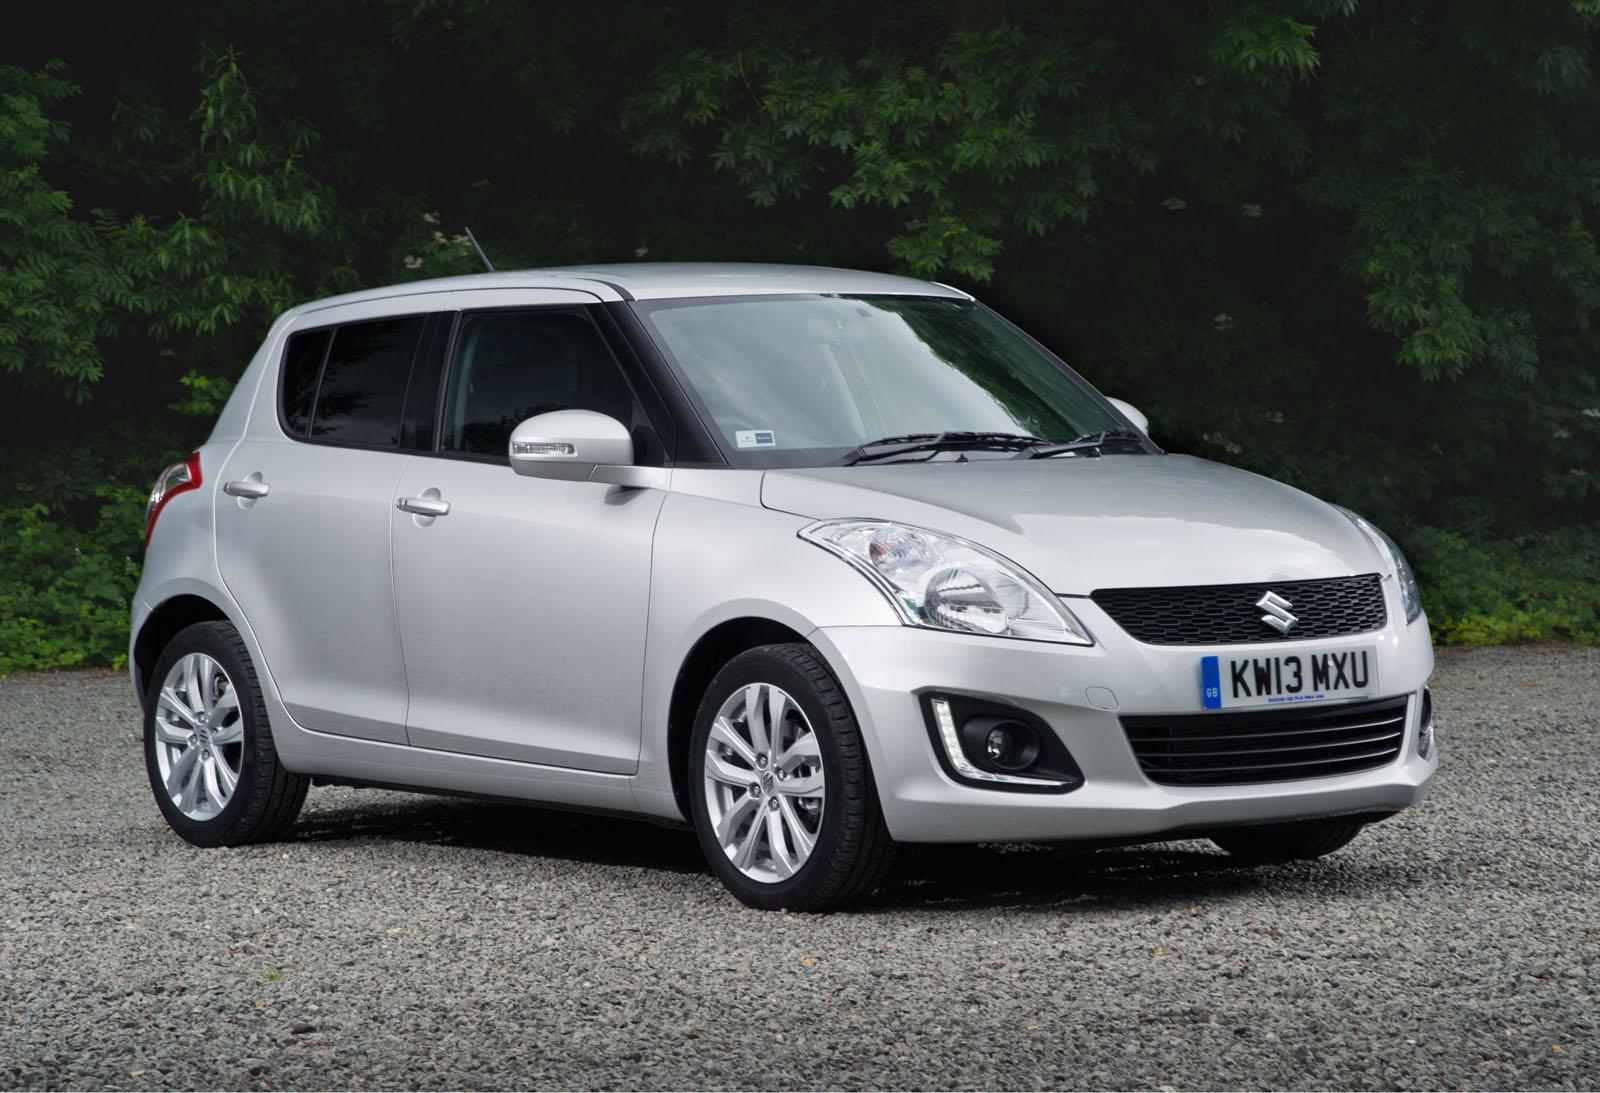 2013 Suzuki Swift Facelift Launched in the UK autoevolution